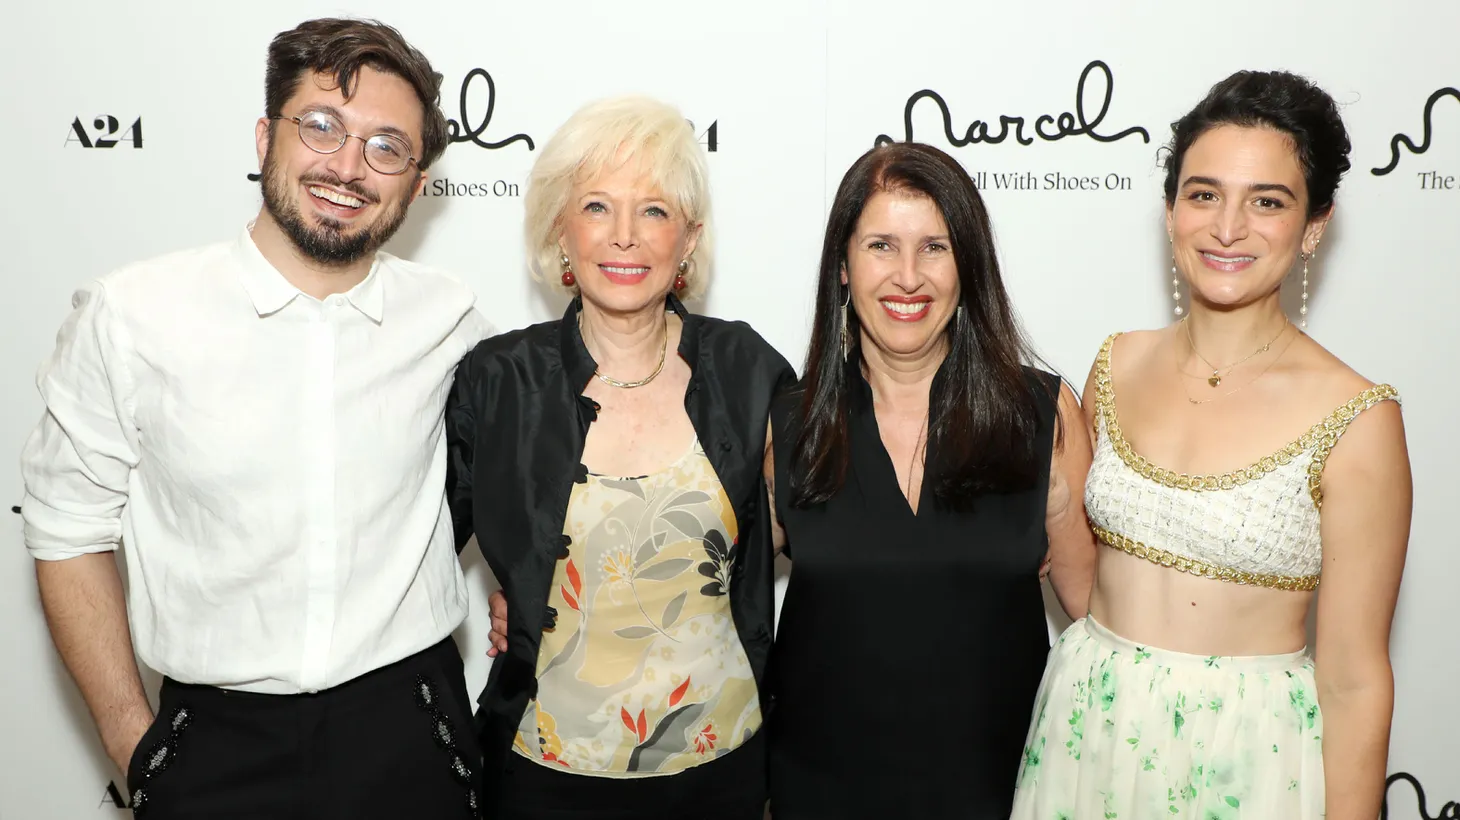 Dean Fleischer-Camp, Lesley Stahl, Caroline Kaplan, and Jenny Slate attend New York Special Screening of “Marcel the Shell With Shoes On” in New York City.